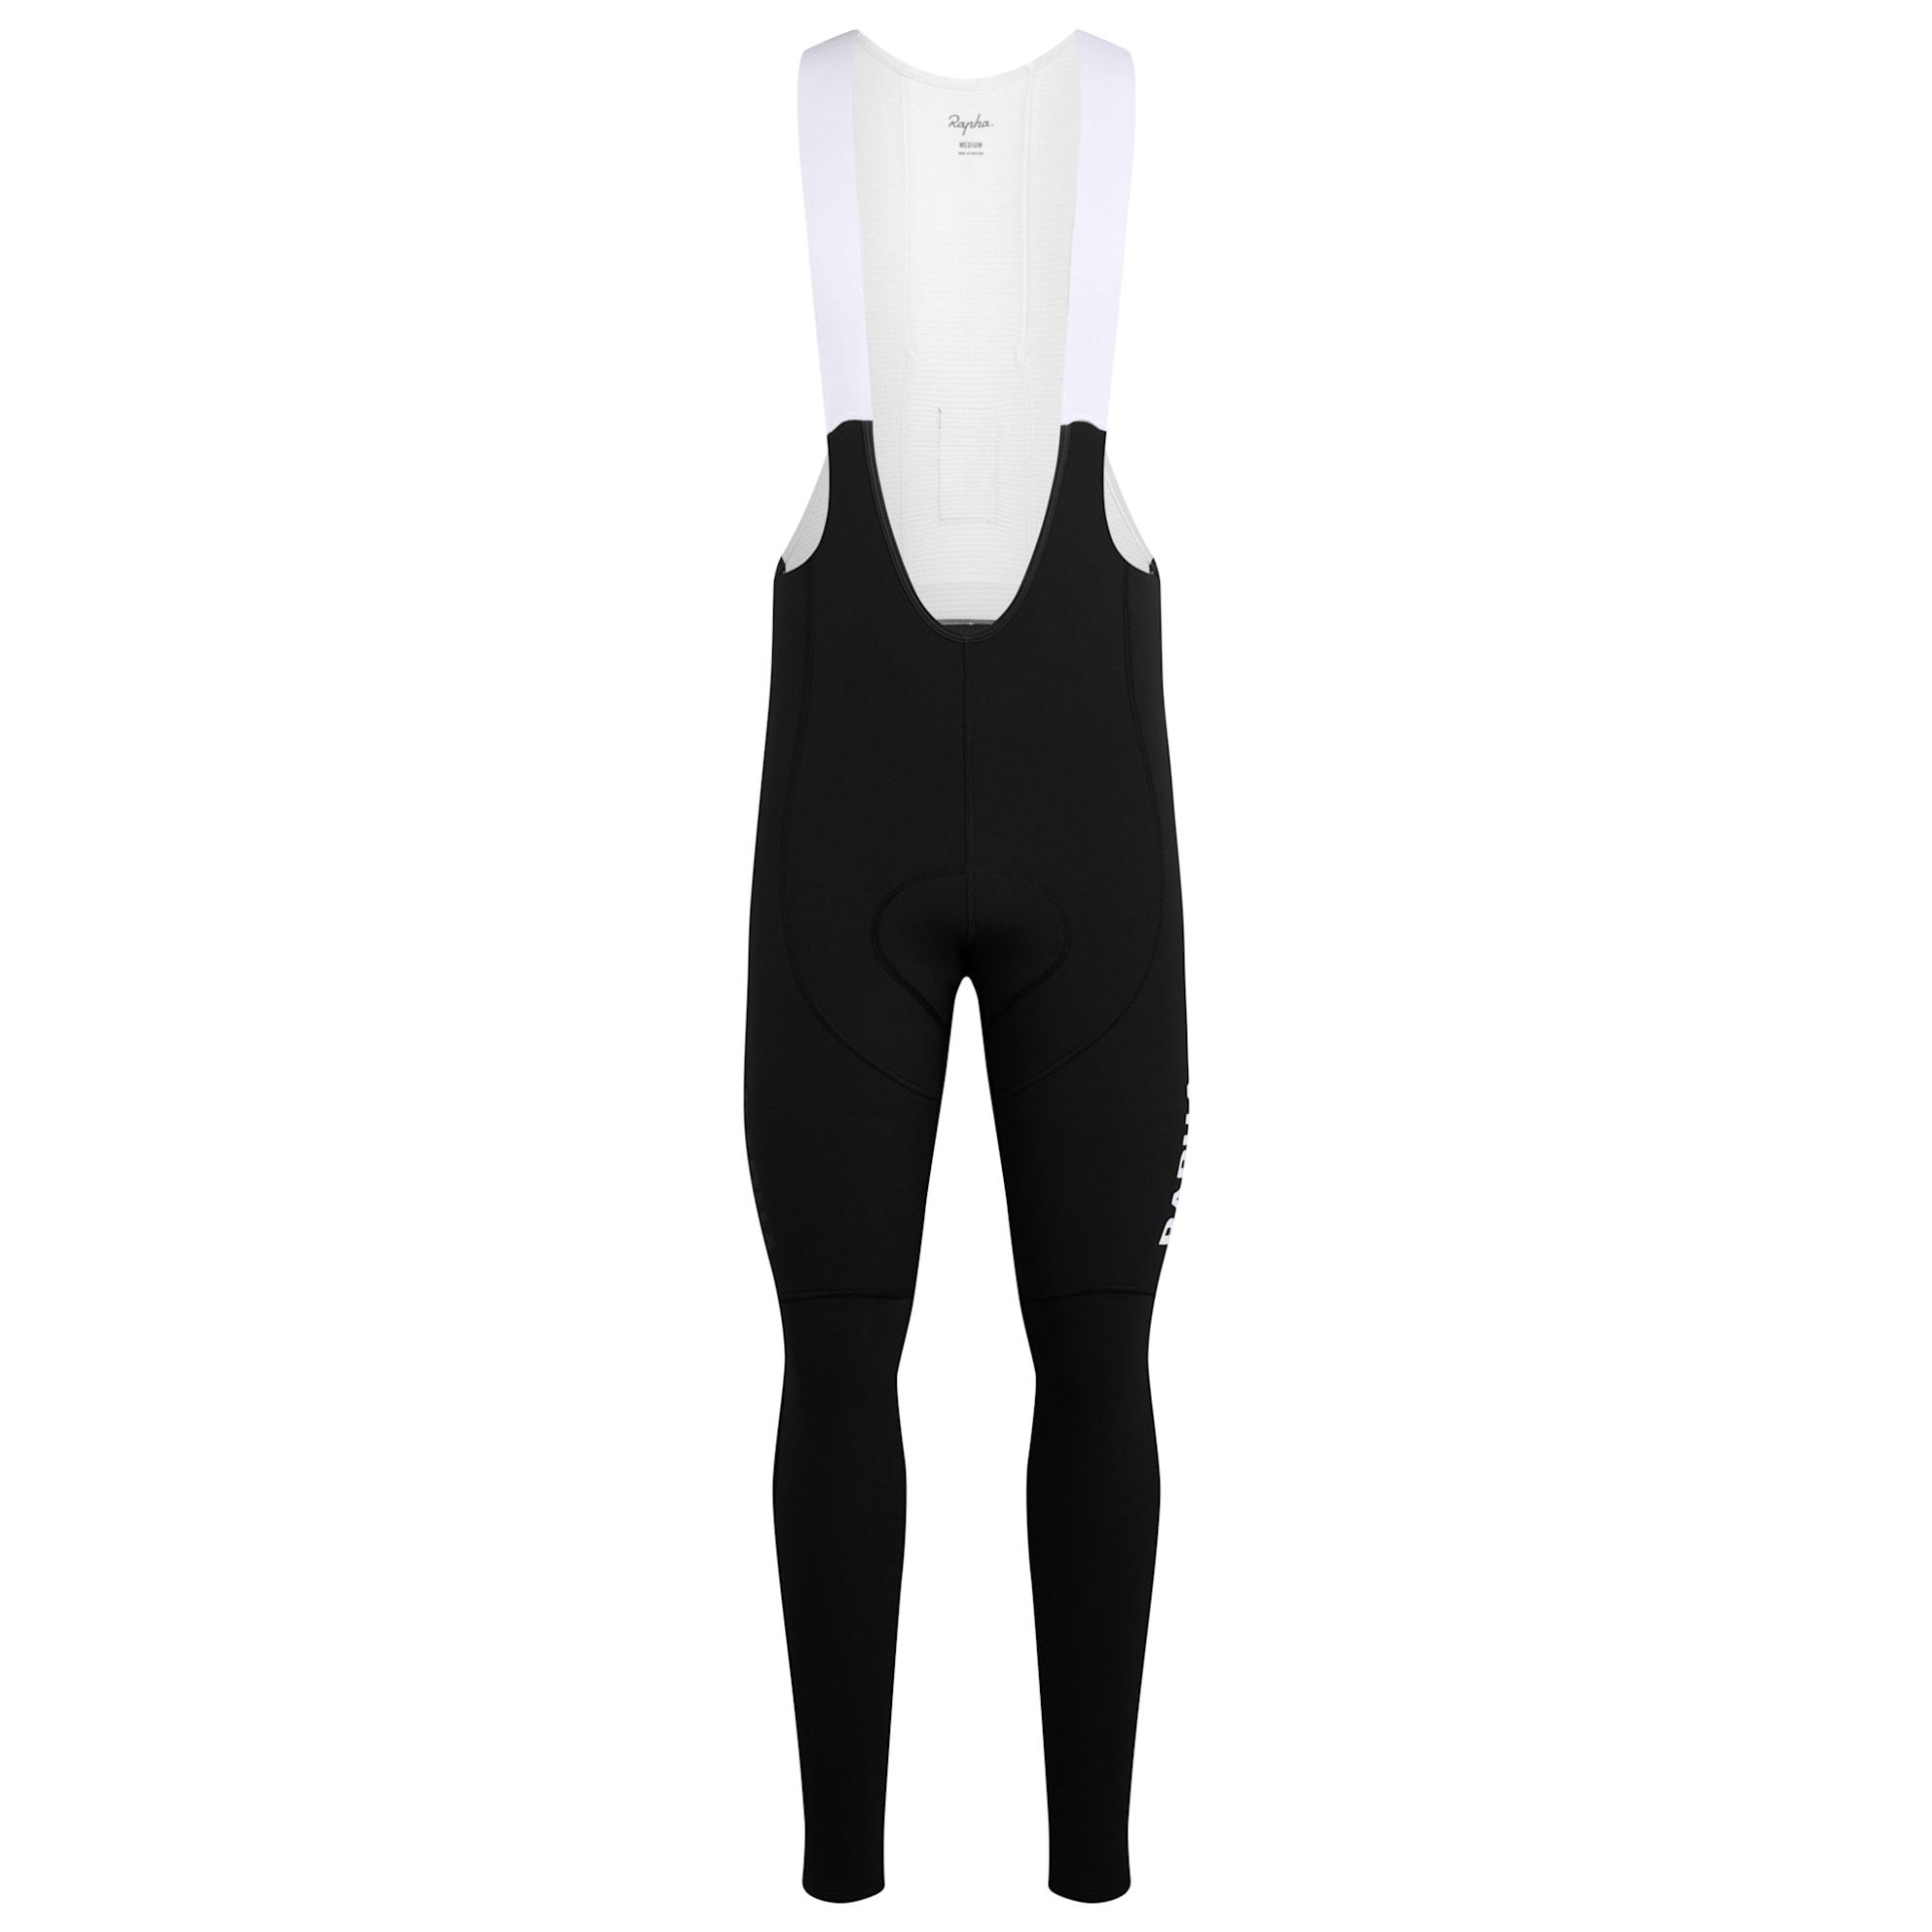 Men's Pro Team Winter Tights with Pad II